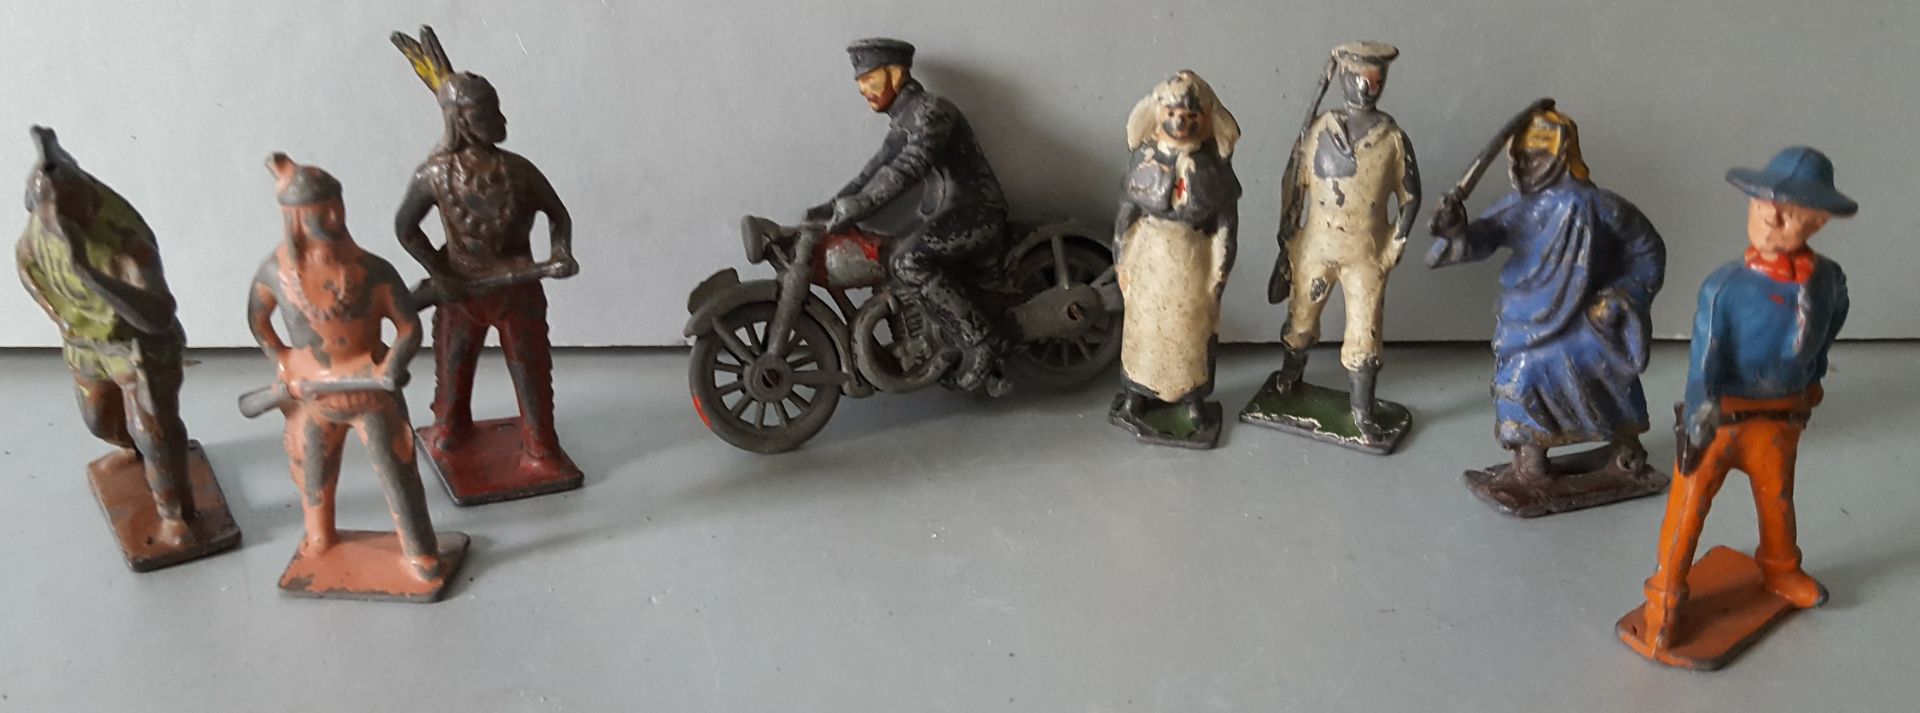 Antique Collectable Britains Metal Toy Figures Military Motorbike Red Indians Cowboys Medical